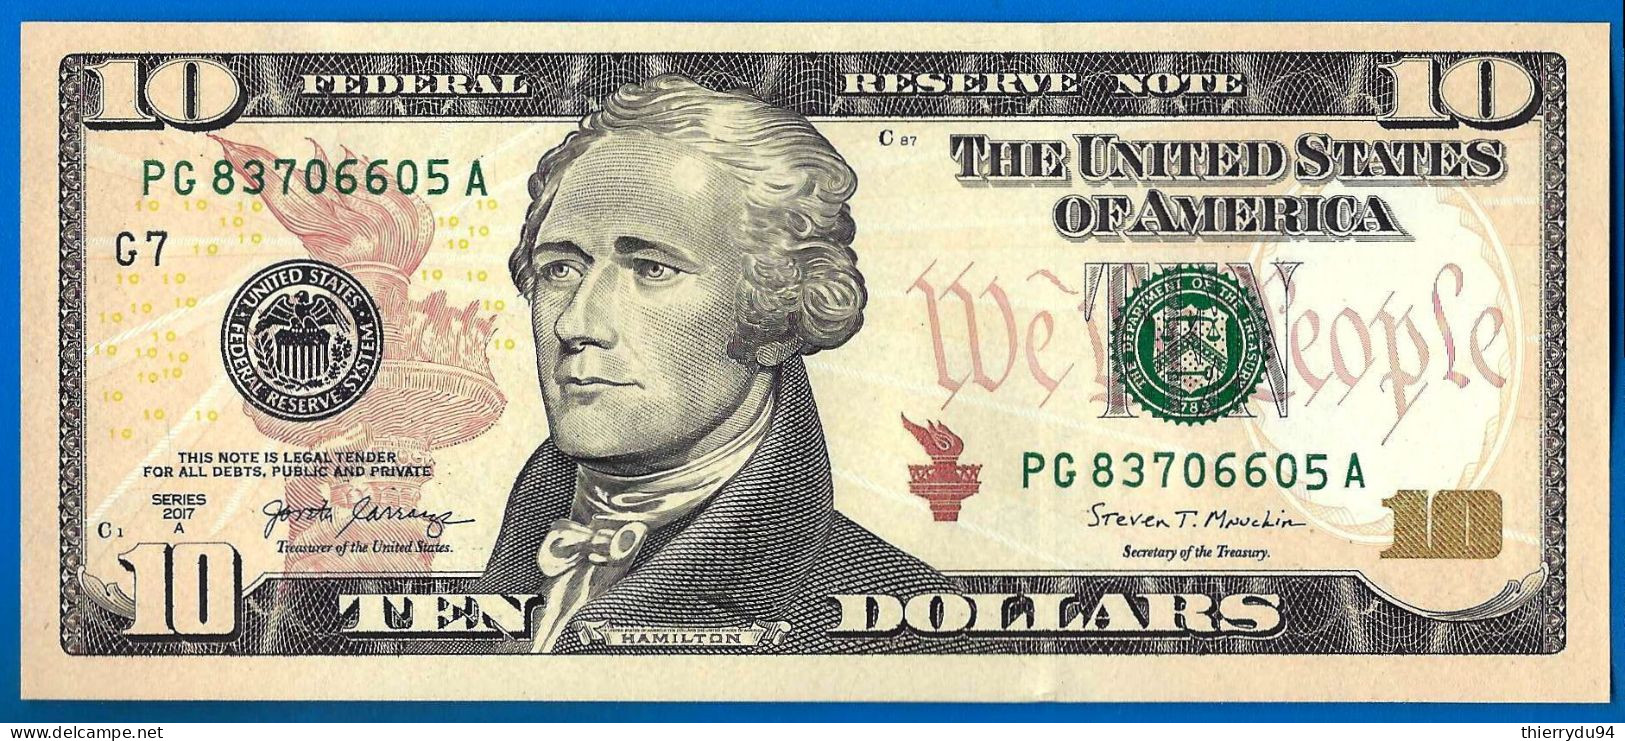 USA 10 Dollars 2017 A Neuf UNC Mint Chicago G7 Suffixe A Etats Unis United States Dollar Paypal Bitcoin - Federal Reserve (1928-...)